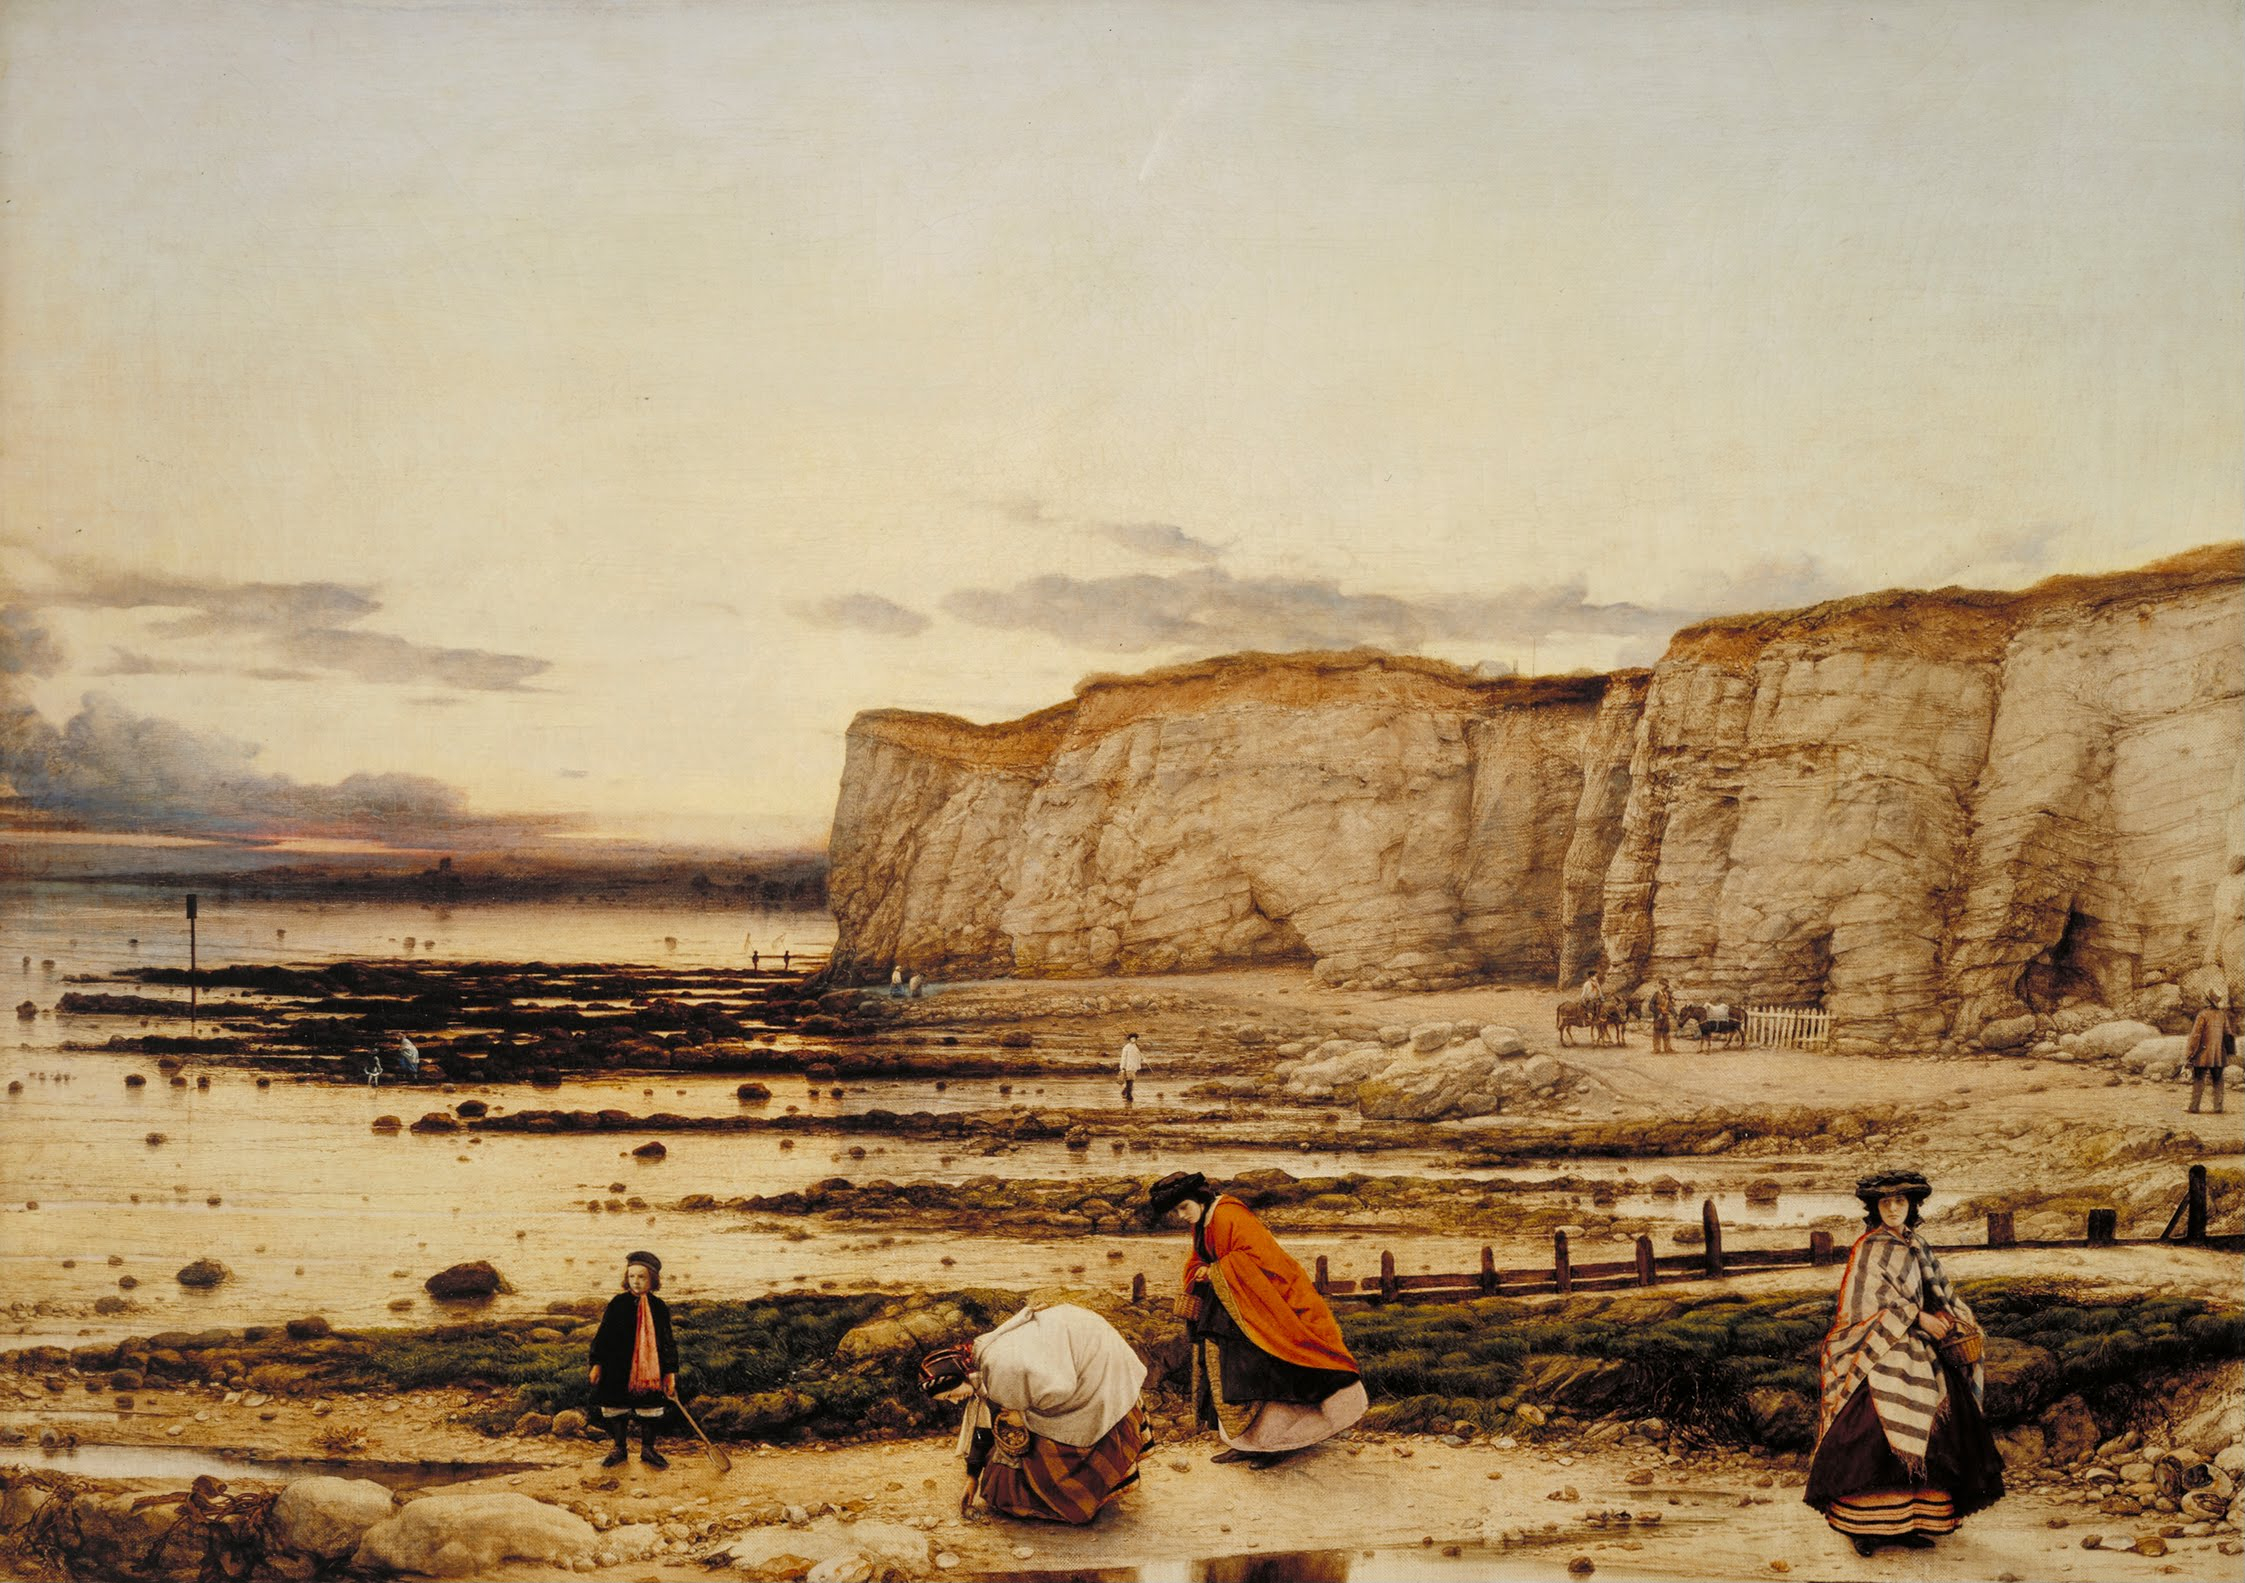 https://upload.wikimedia.org/wikipedia/commons/3/3b/William_Dyce_-_Pegwell_Bay%2C_Kent_-_a_Recollection_of_October_5th_1858_-_Google_Art_Project.jpg